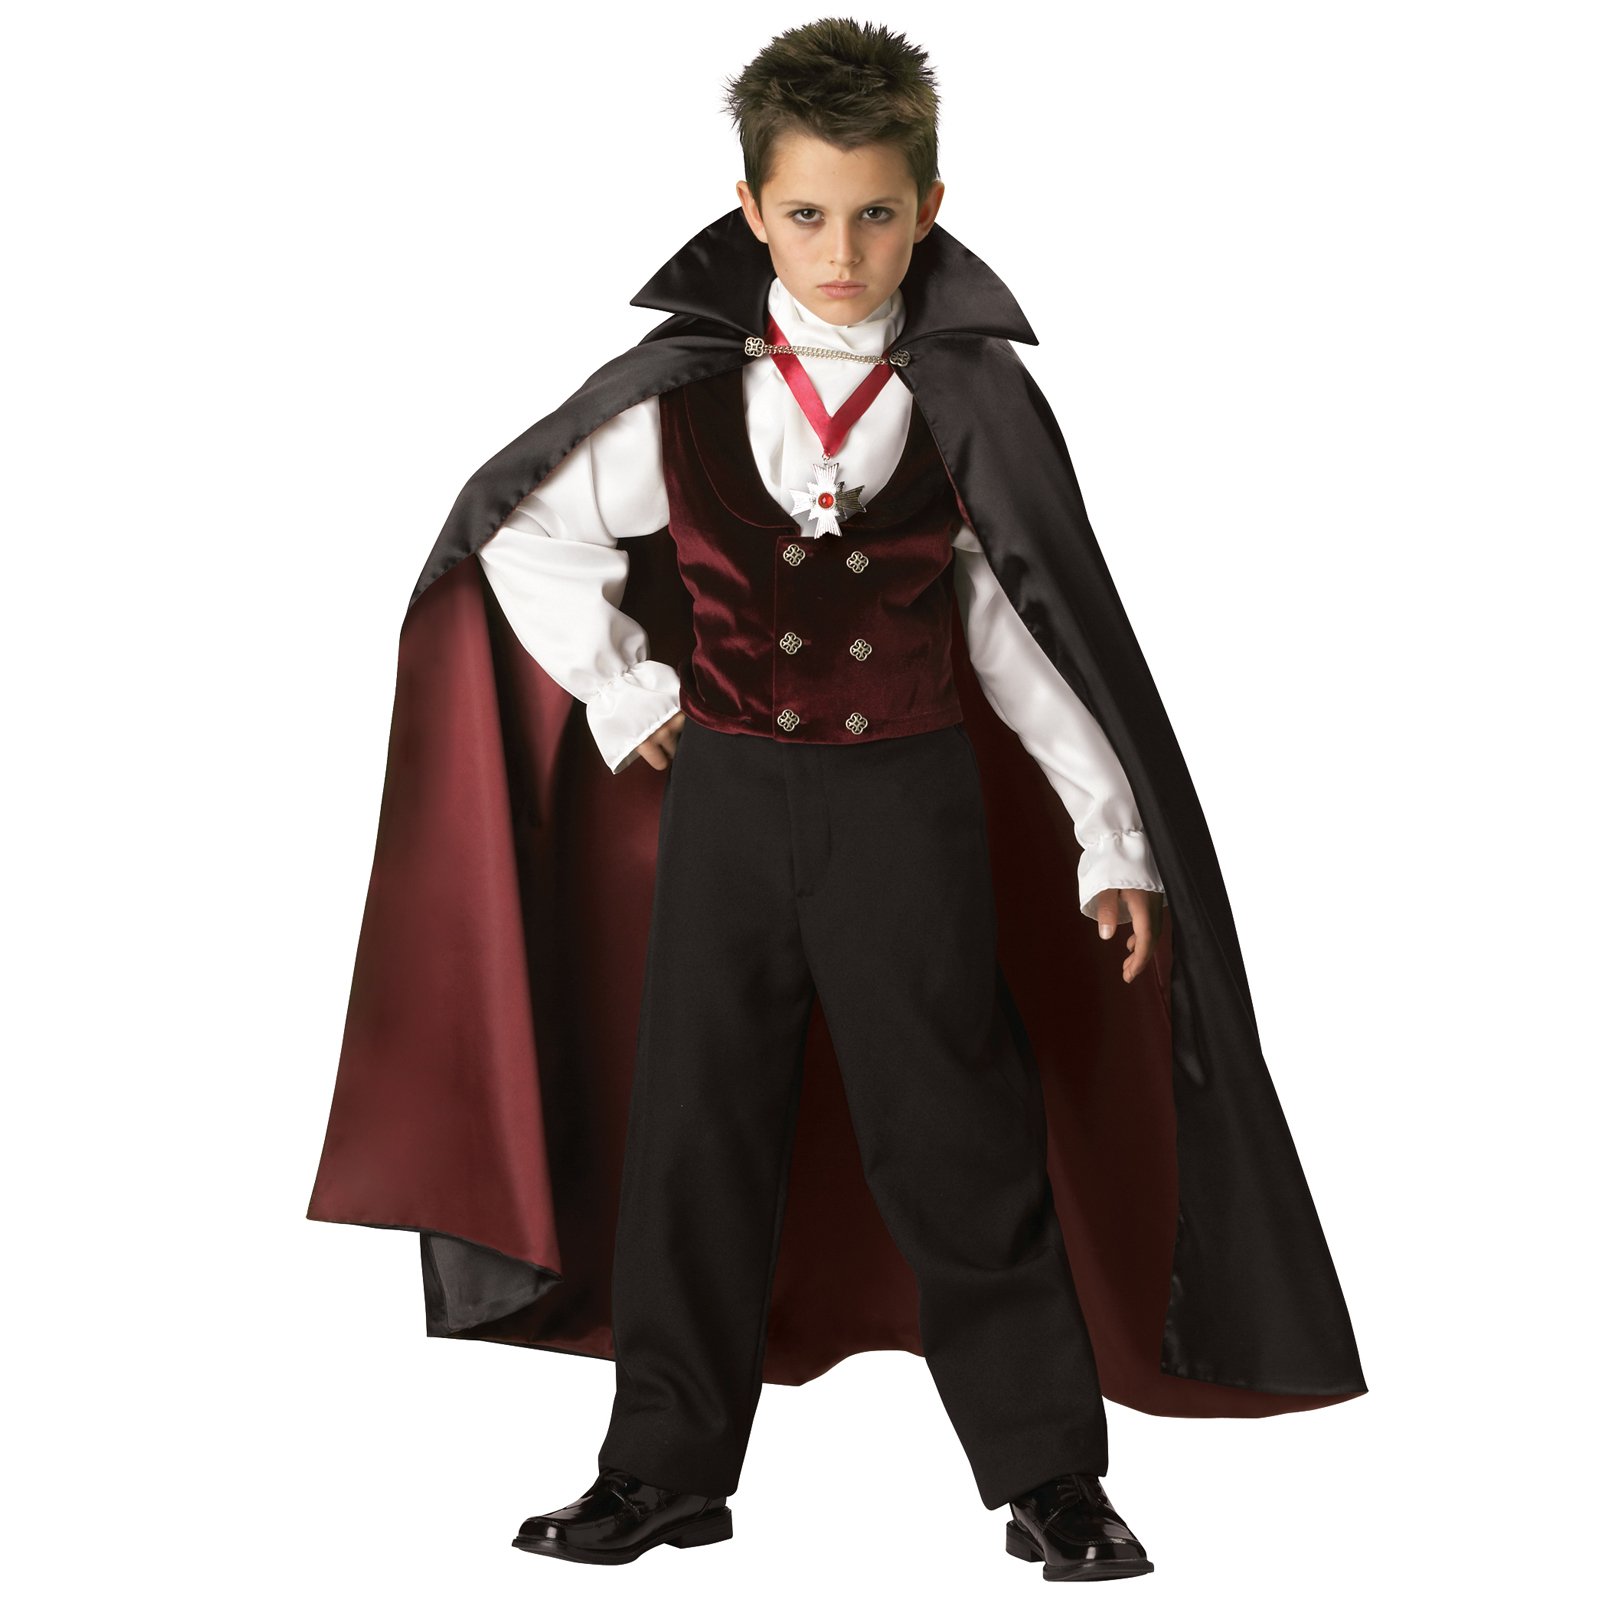 Scary Vampire Costumes - Scary Halloween Costumes